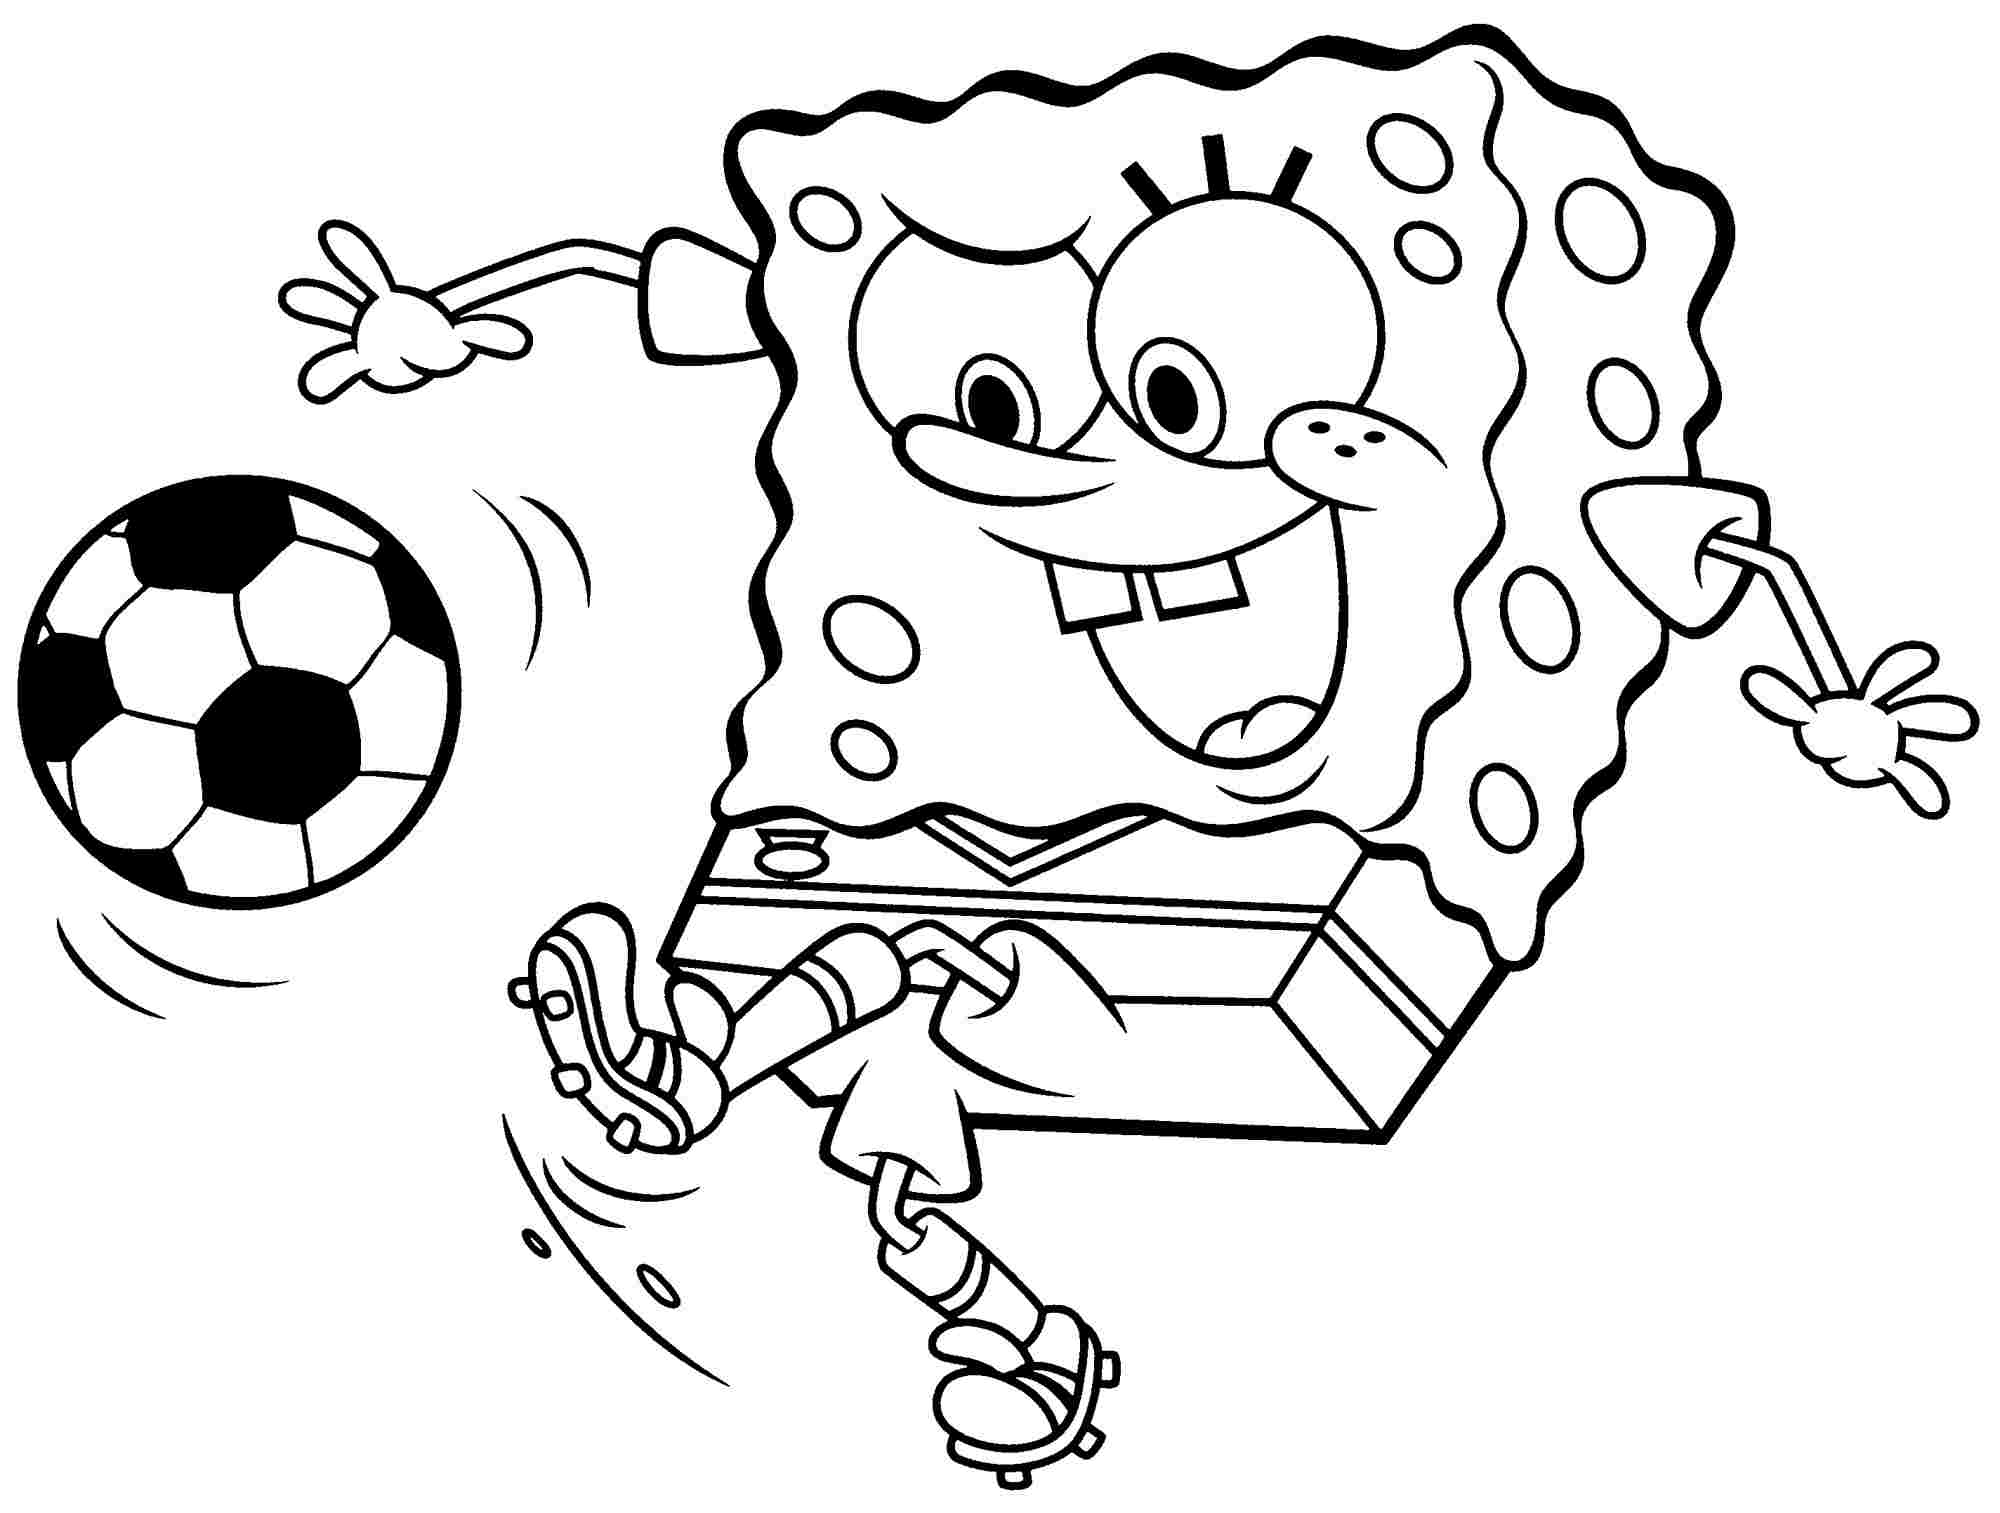 Big Pants Coloring Pages - Coloring Pages For All Ages